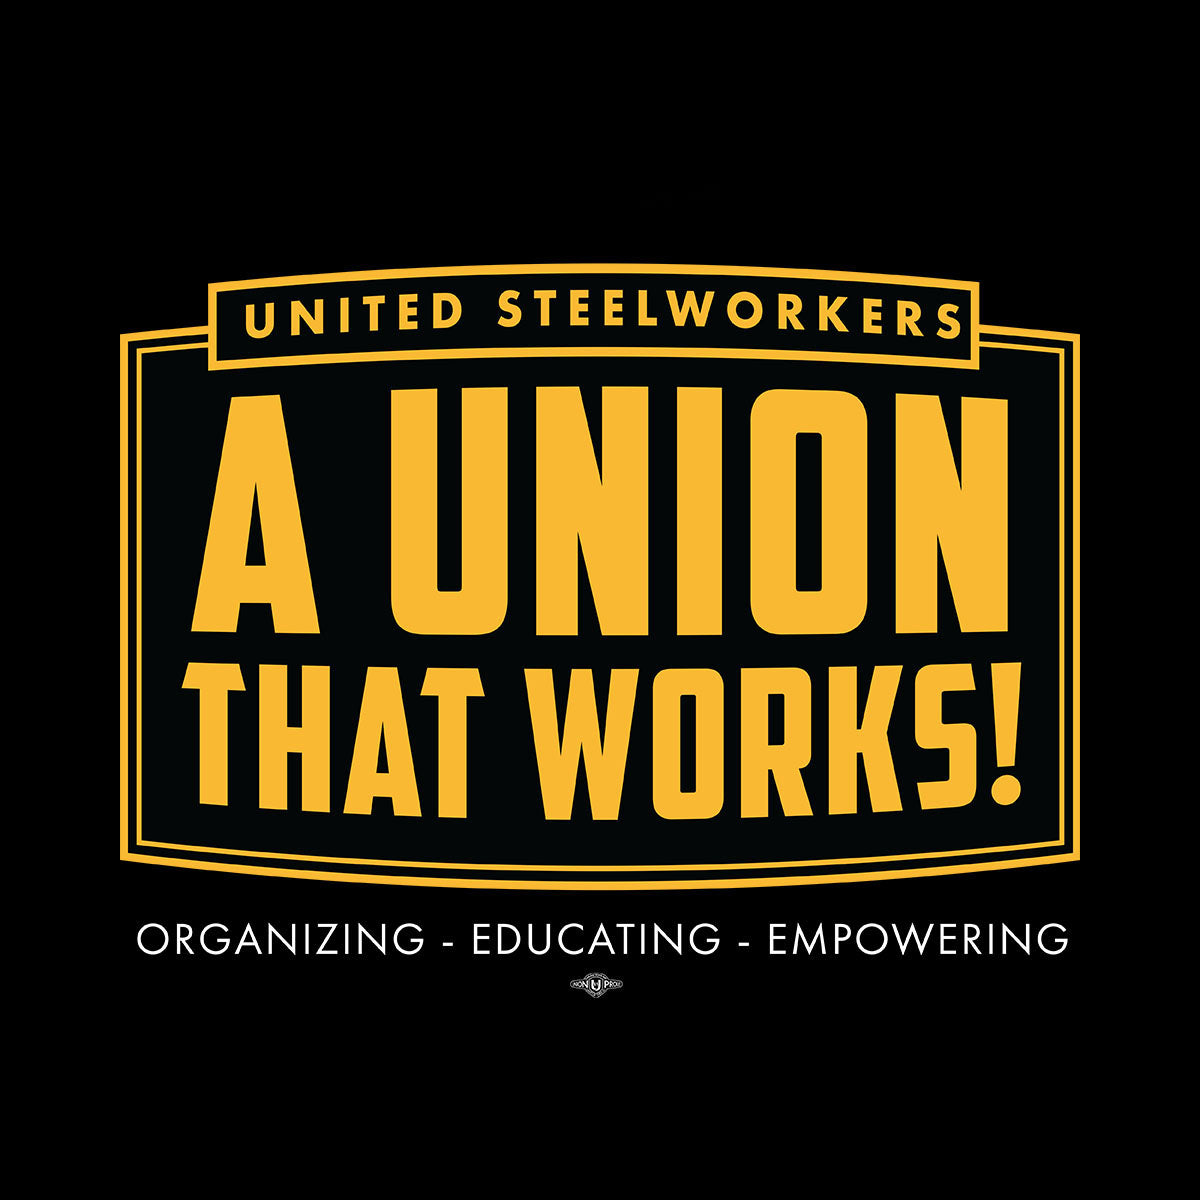 USW - A Union That Works - Apparel